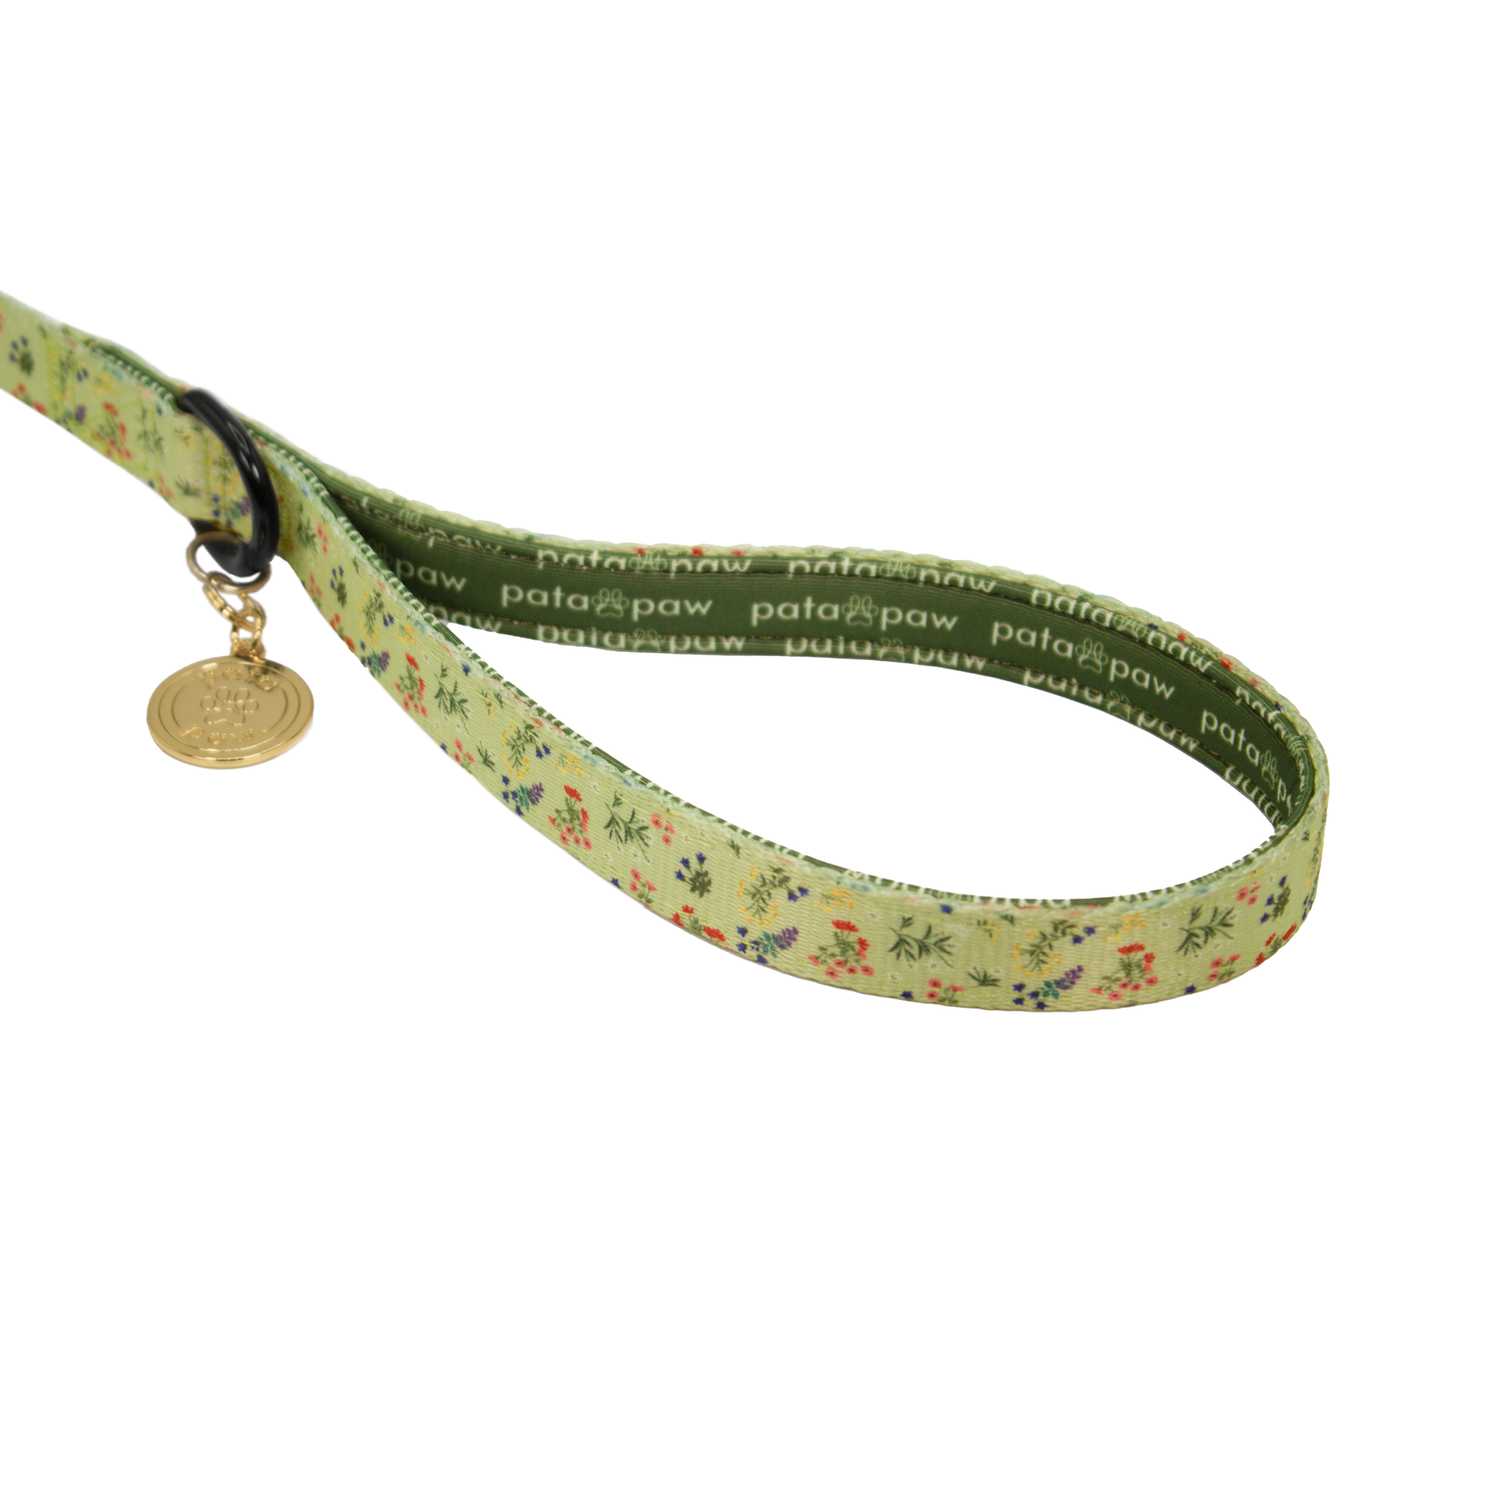 pata paw alpine wildflowers leash showing signature handle, metallic ring to attach a poop bag holder and golden paw medal